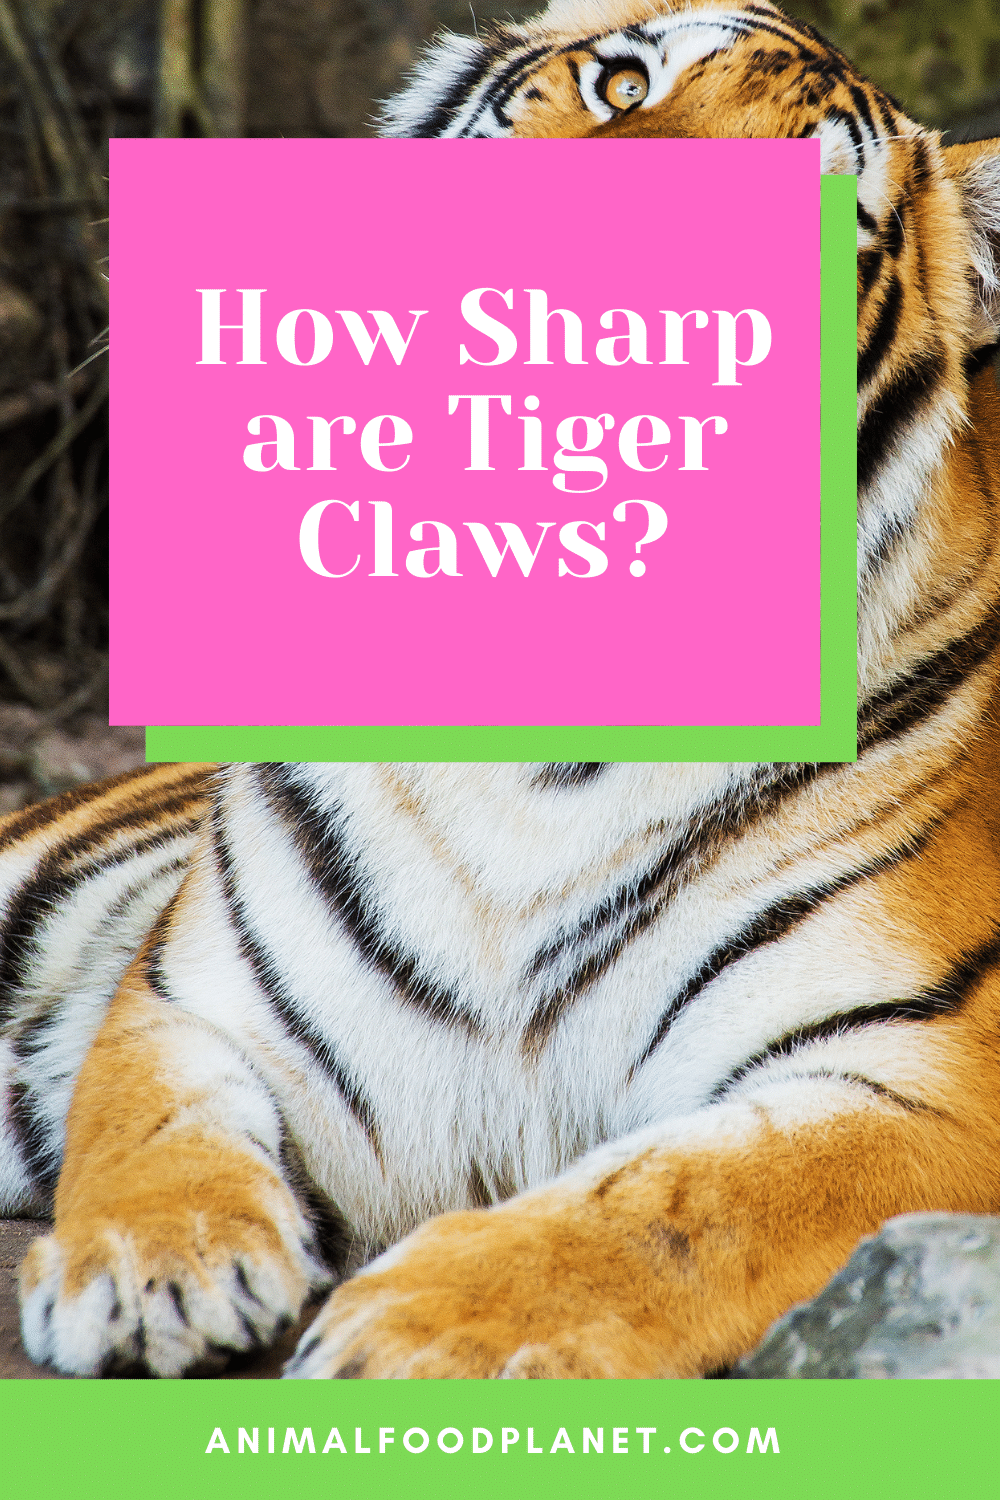 How Sharp Are Tiger Claws?